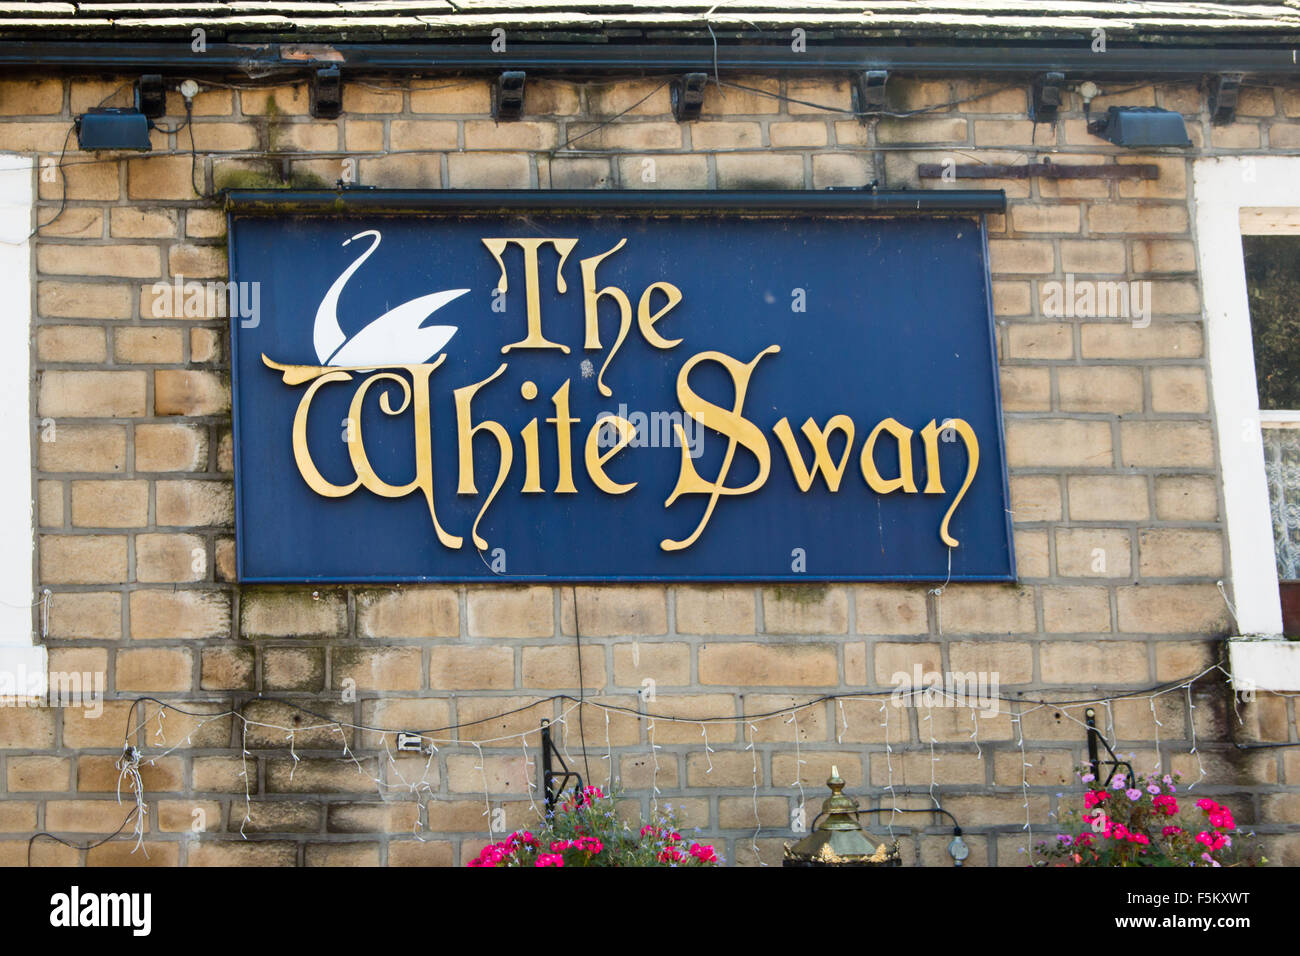 The White Swan Pub welcome sign in central Hebden Bridge, Calderdale, West Yorkshire, England, United Kingdom. Stock Photo